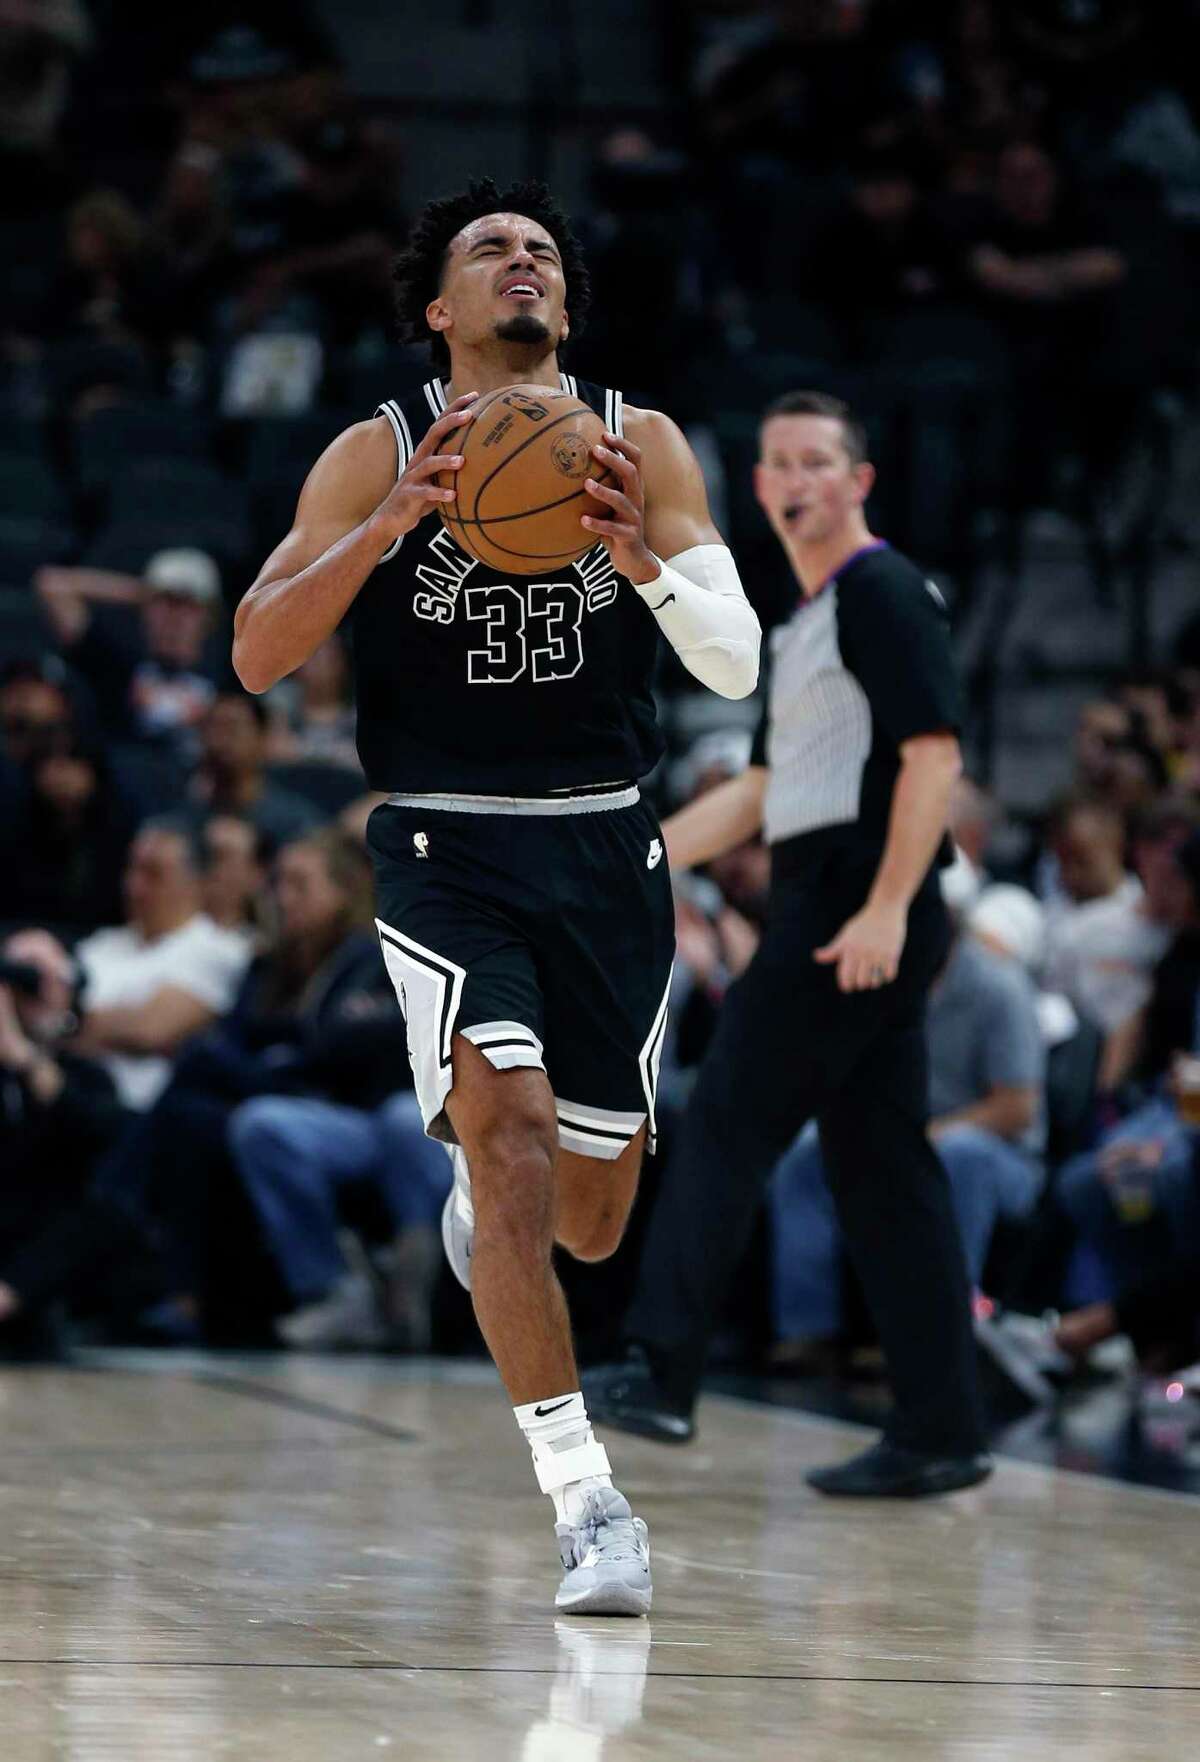 San Antonio Spurs Tre Jones #33 (33) reacts after a turnover against the Denver Nuggets in the first half on Monday, Nov. 7, 2022 at AT&T Center